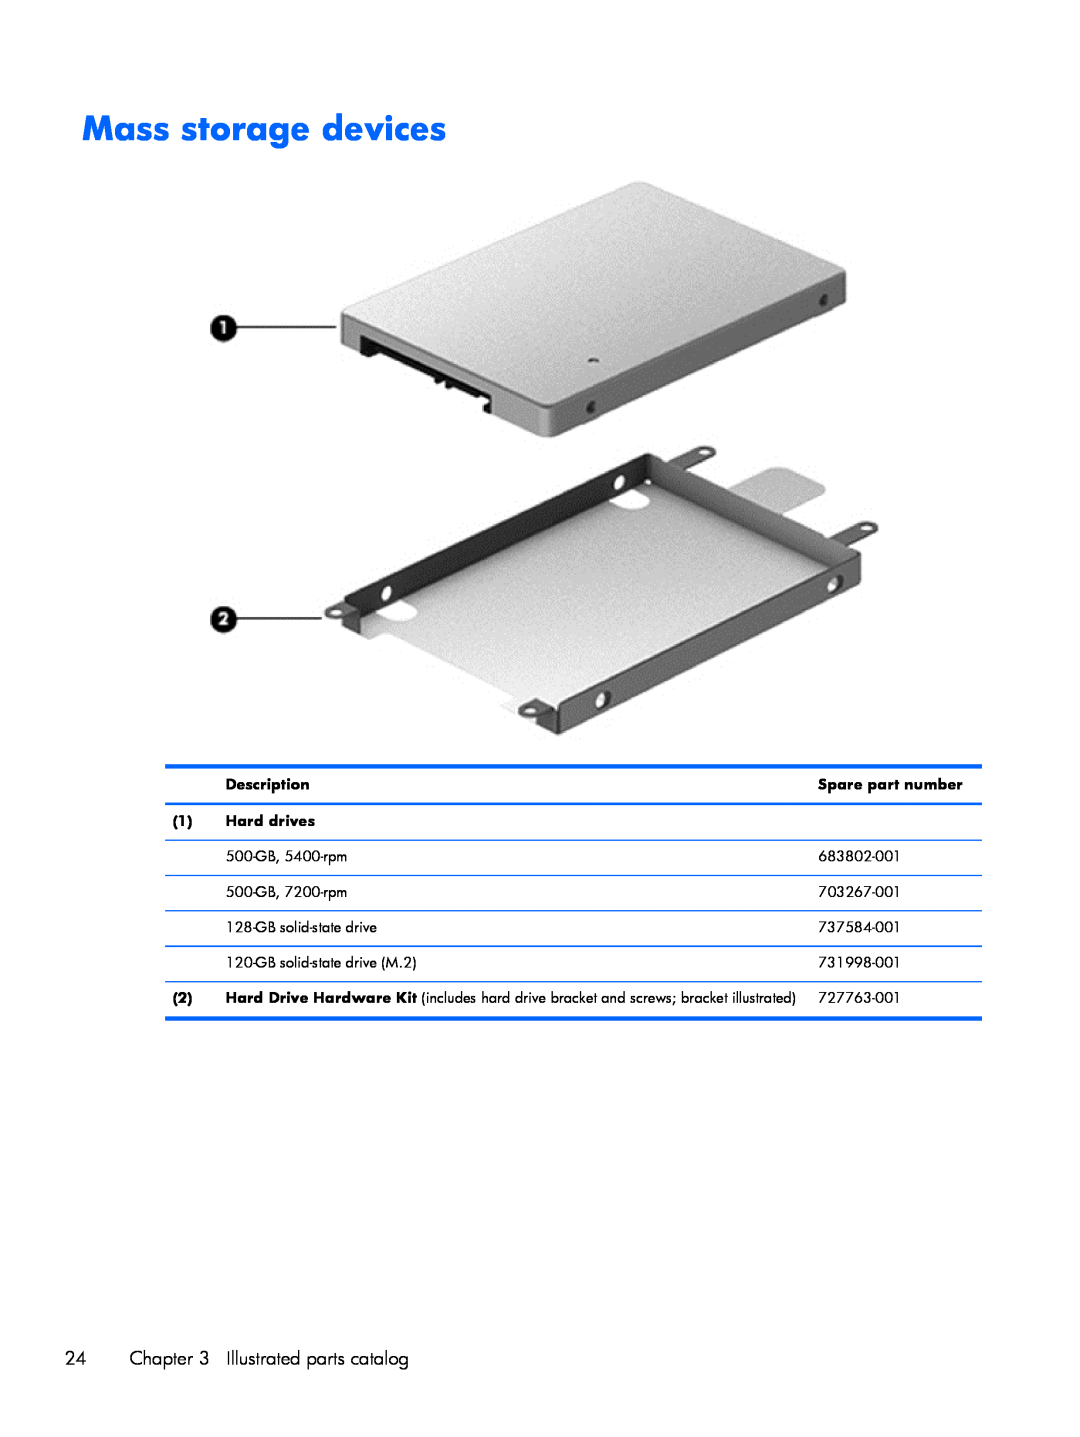 HP 430 G1 E3U87UTABA manual Mass storage devices, Illustrated parts catalog, Description, Spare part number, Hard drives 